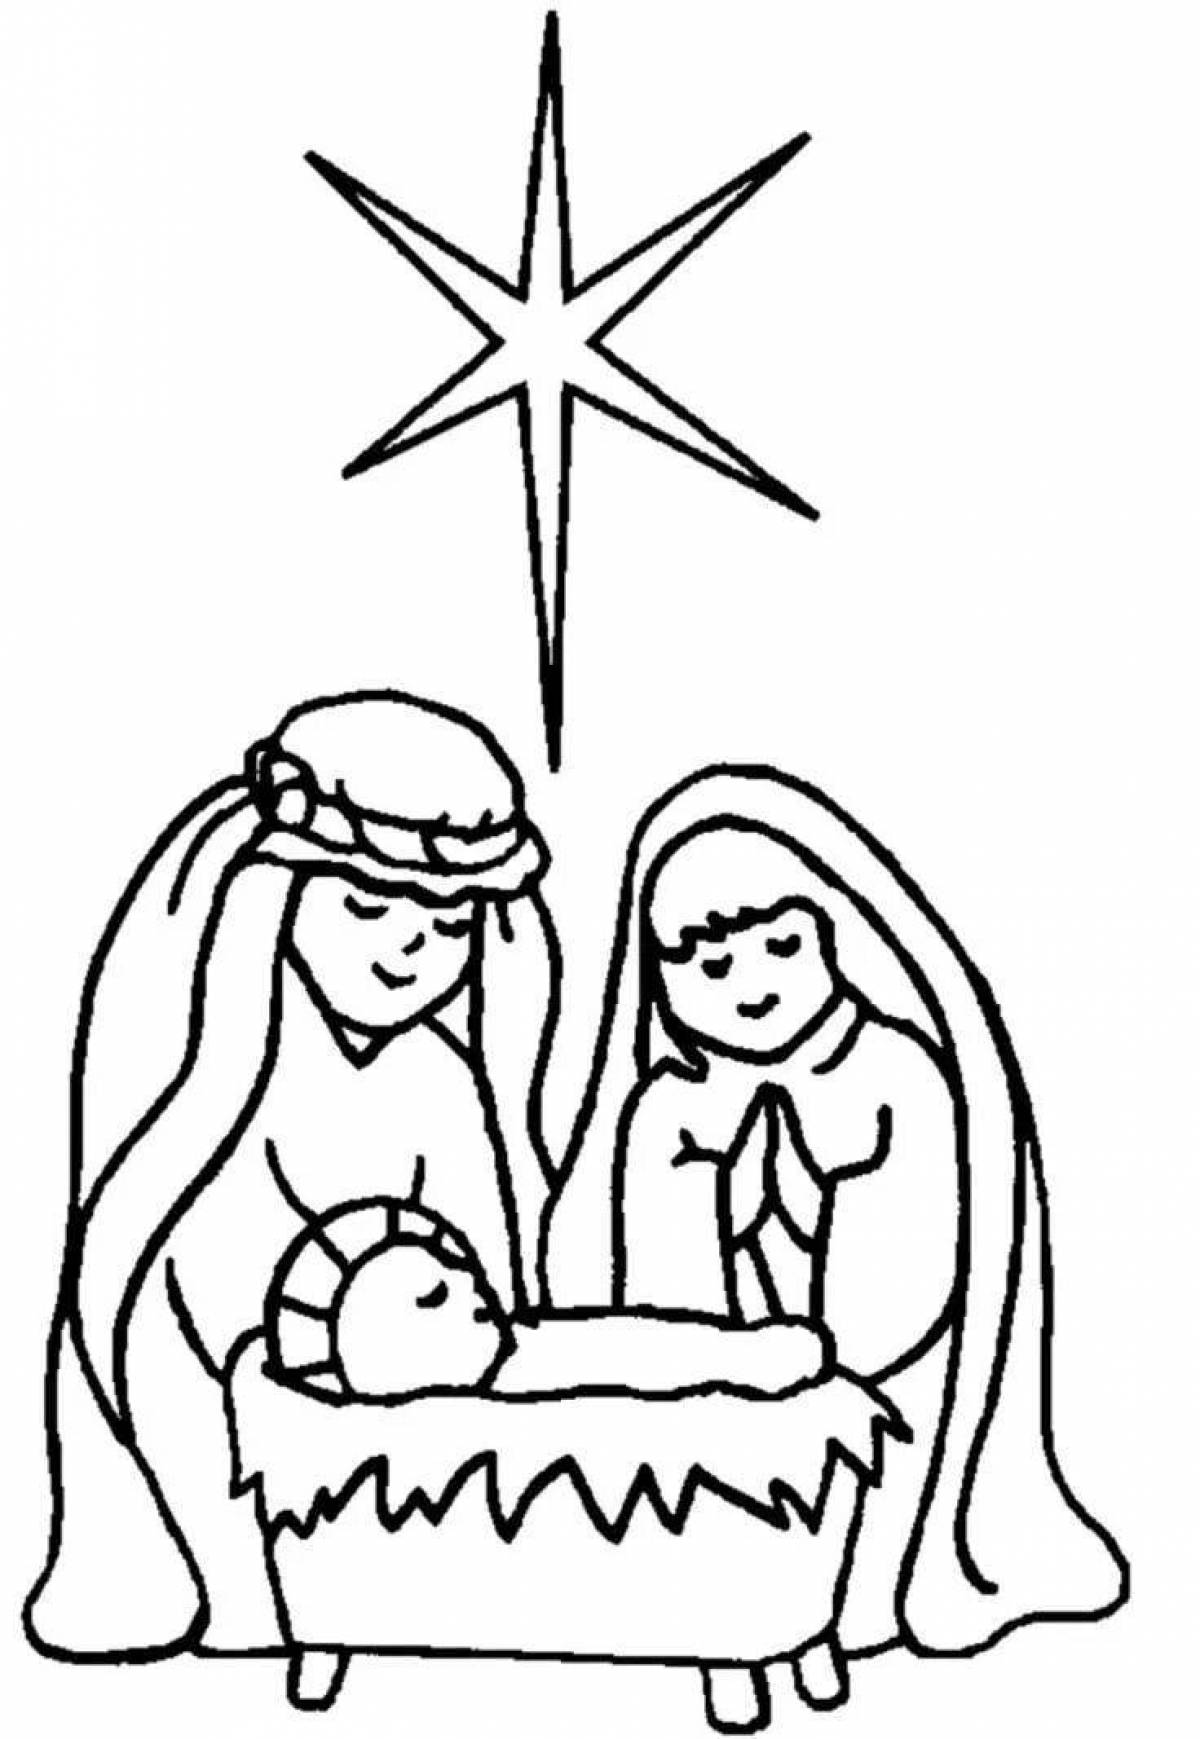 Exalted Star of Bethlehem coloring page